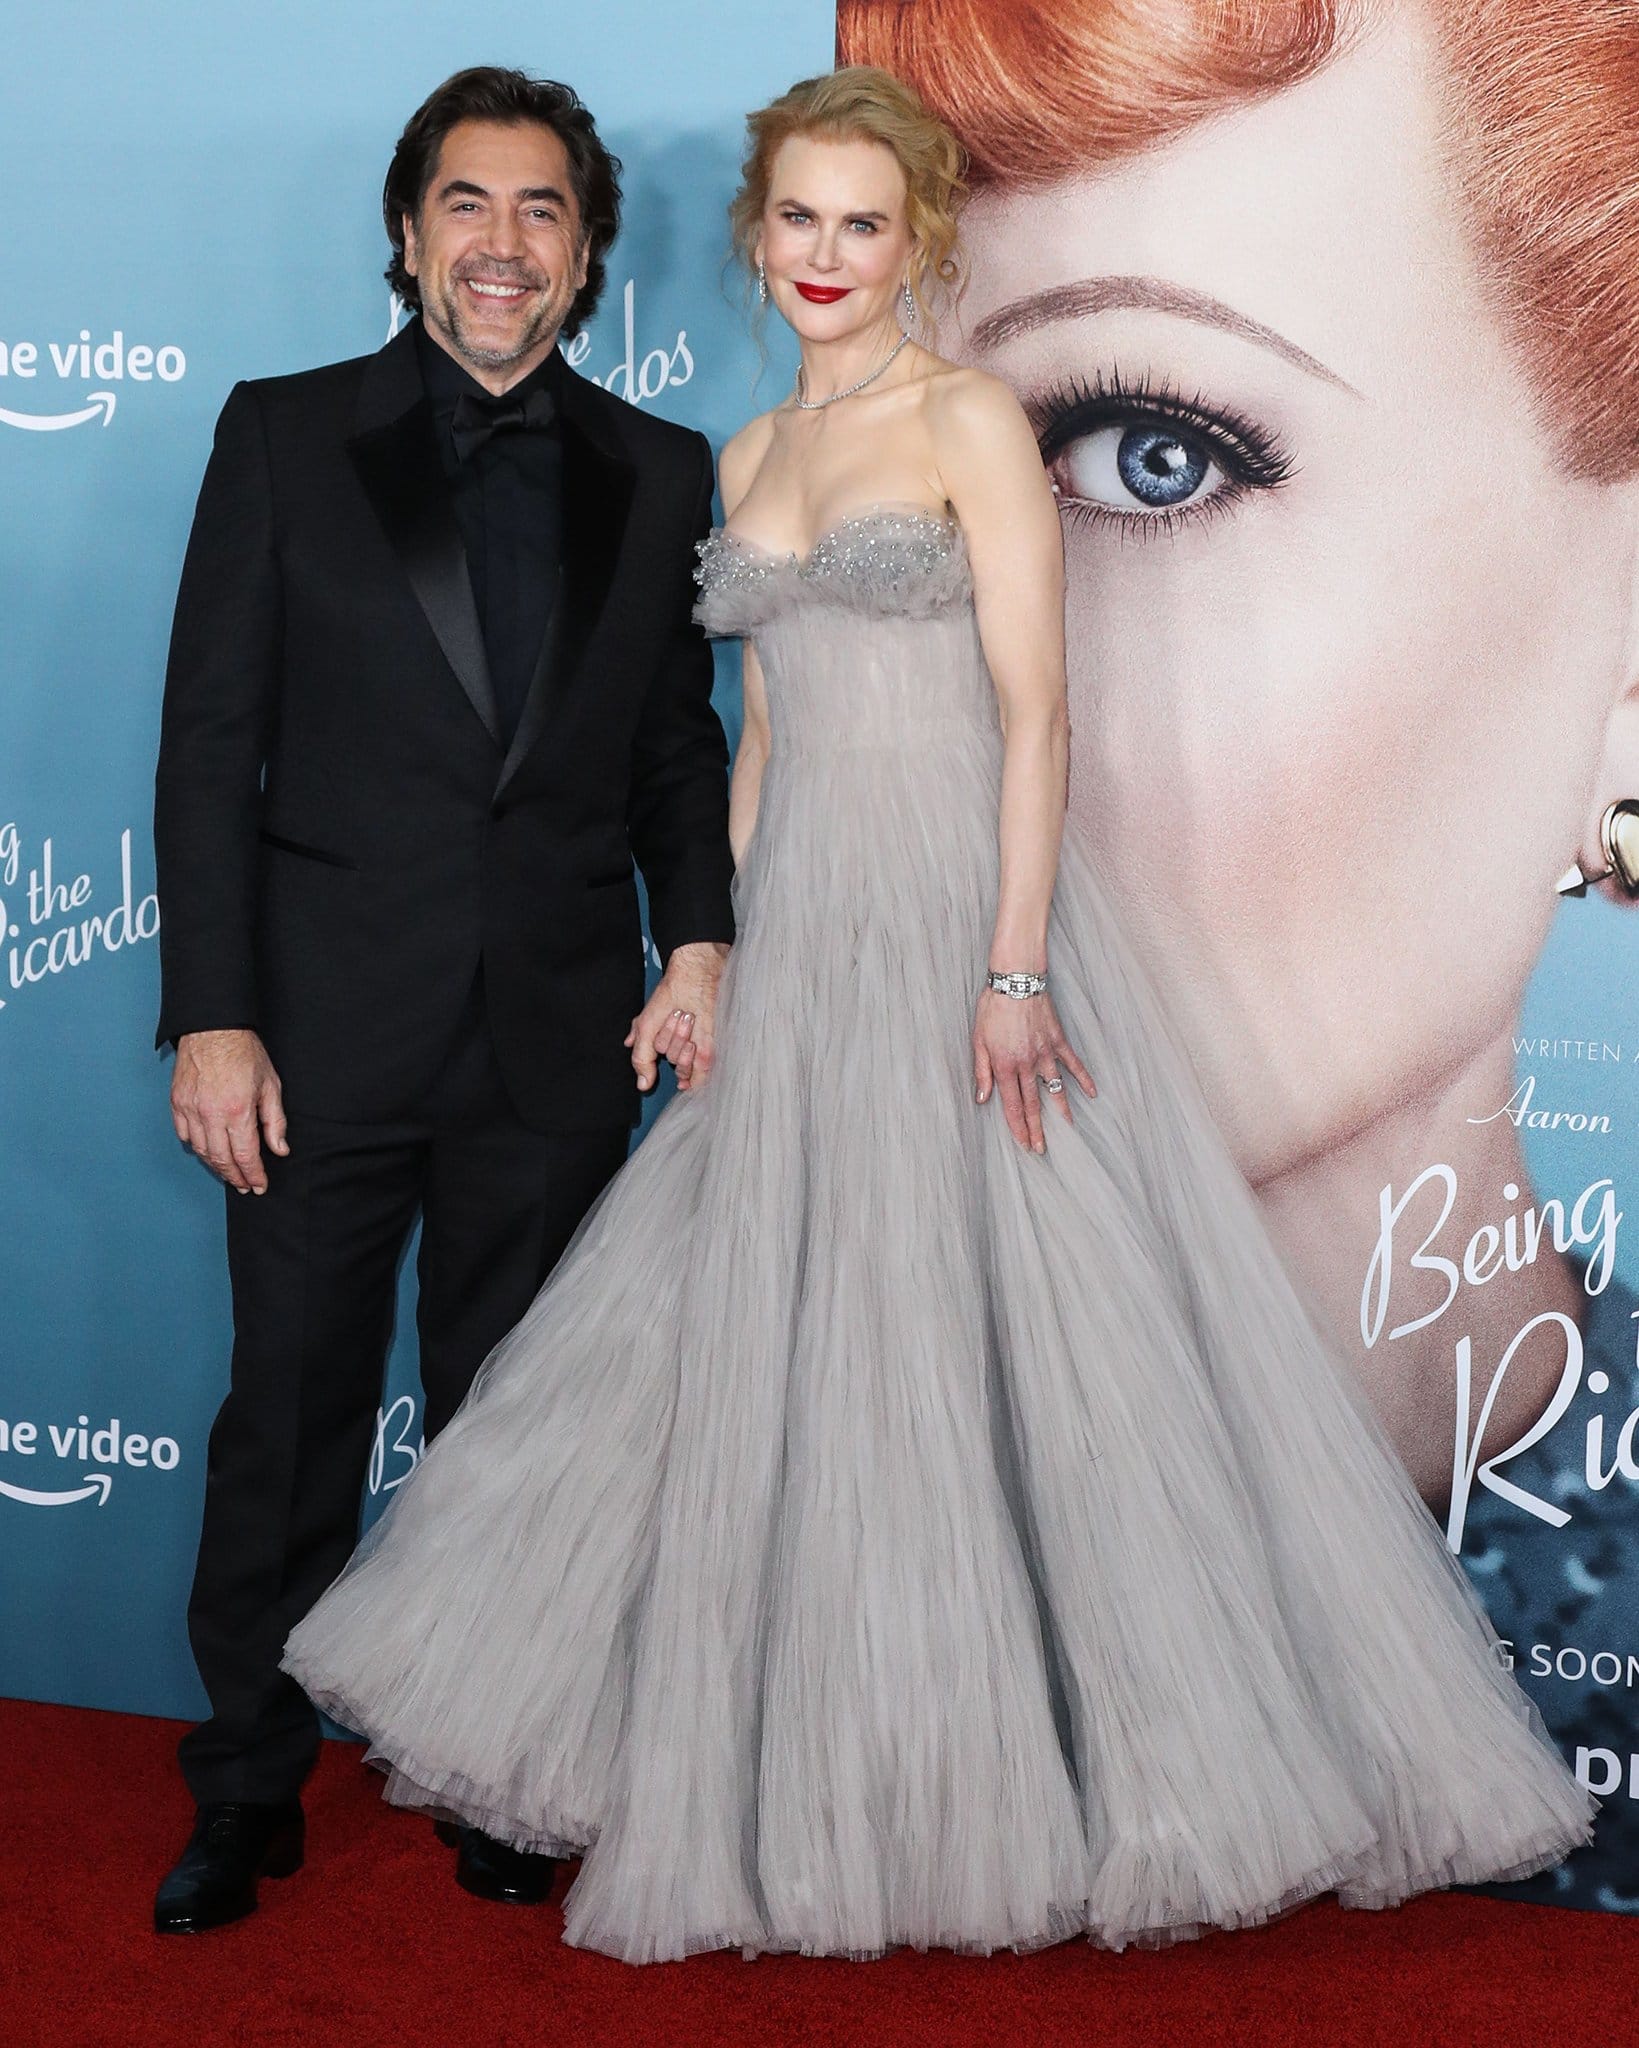 Nicole Kidman holds hands with on-screen husband Javier Bardem on the red carpet